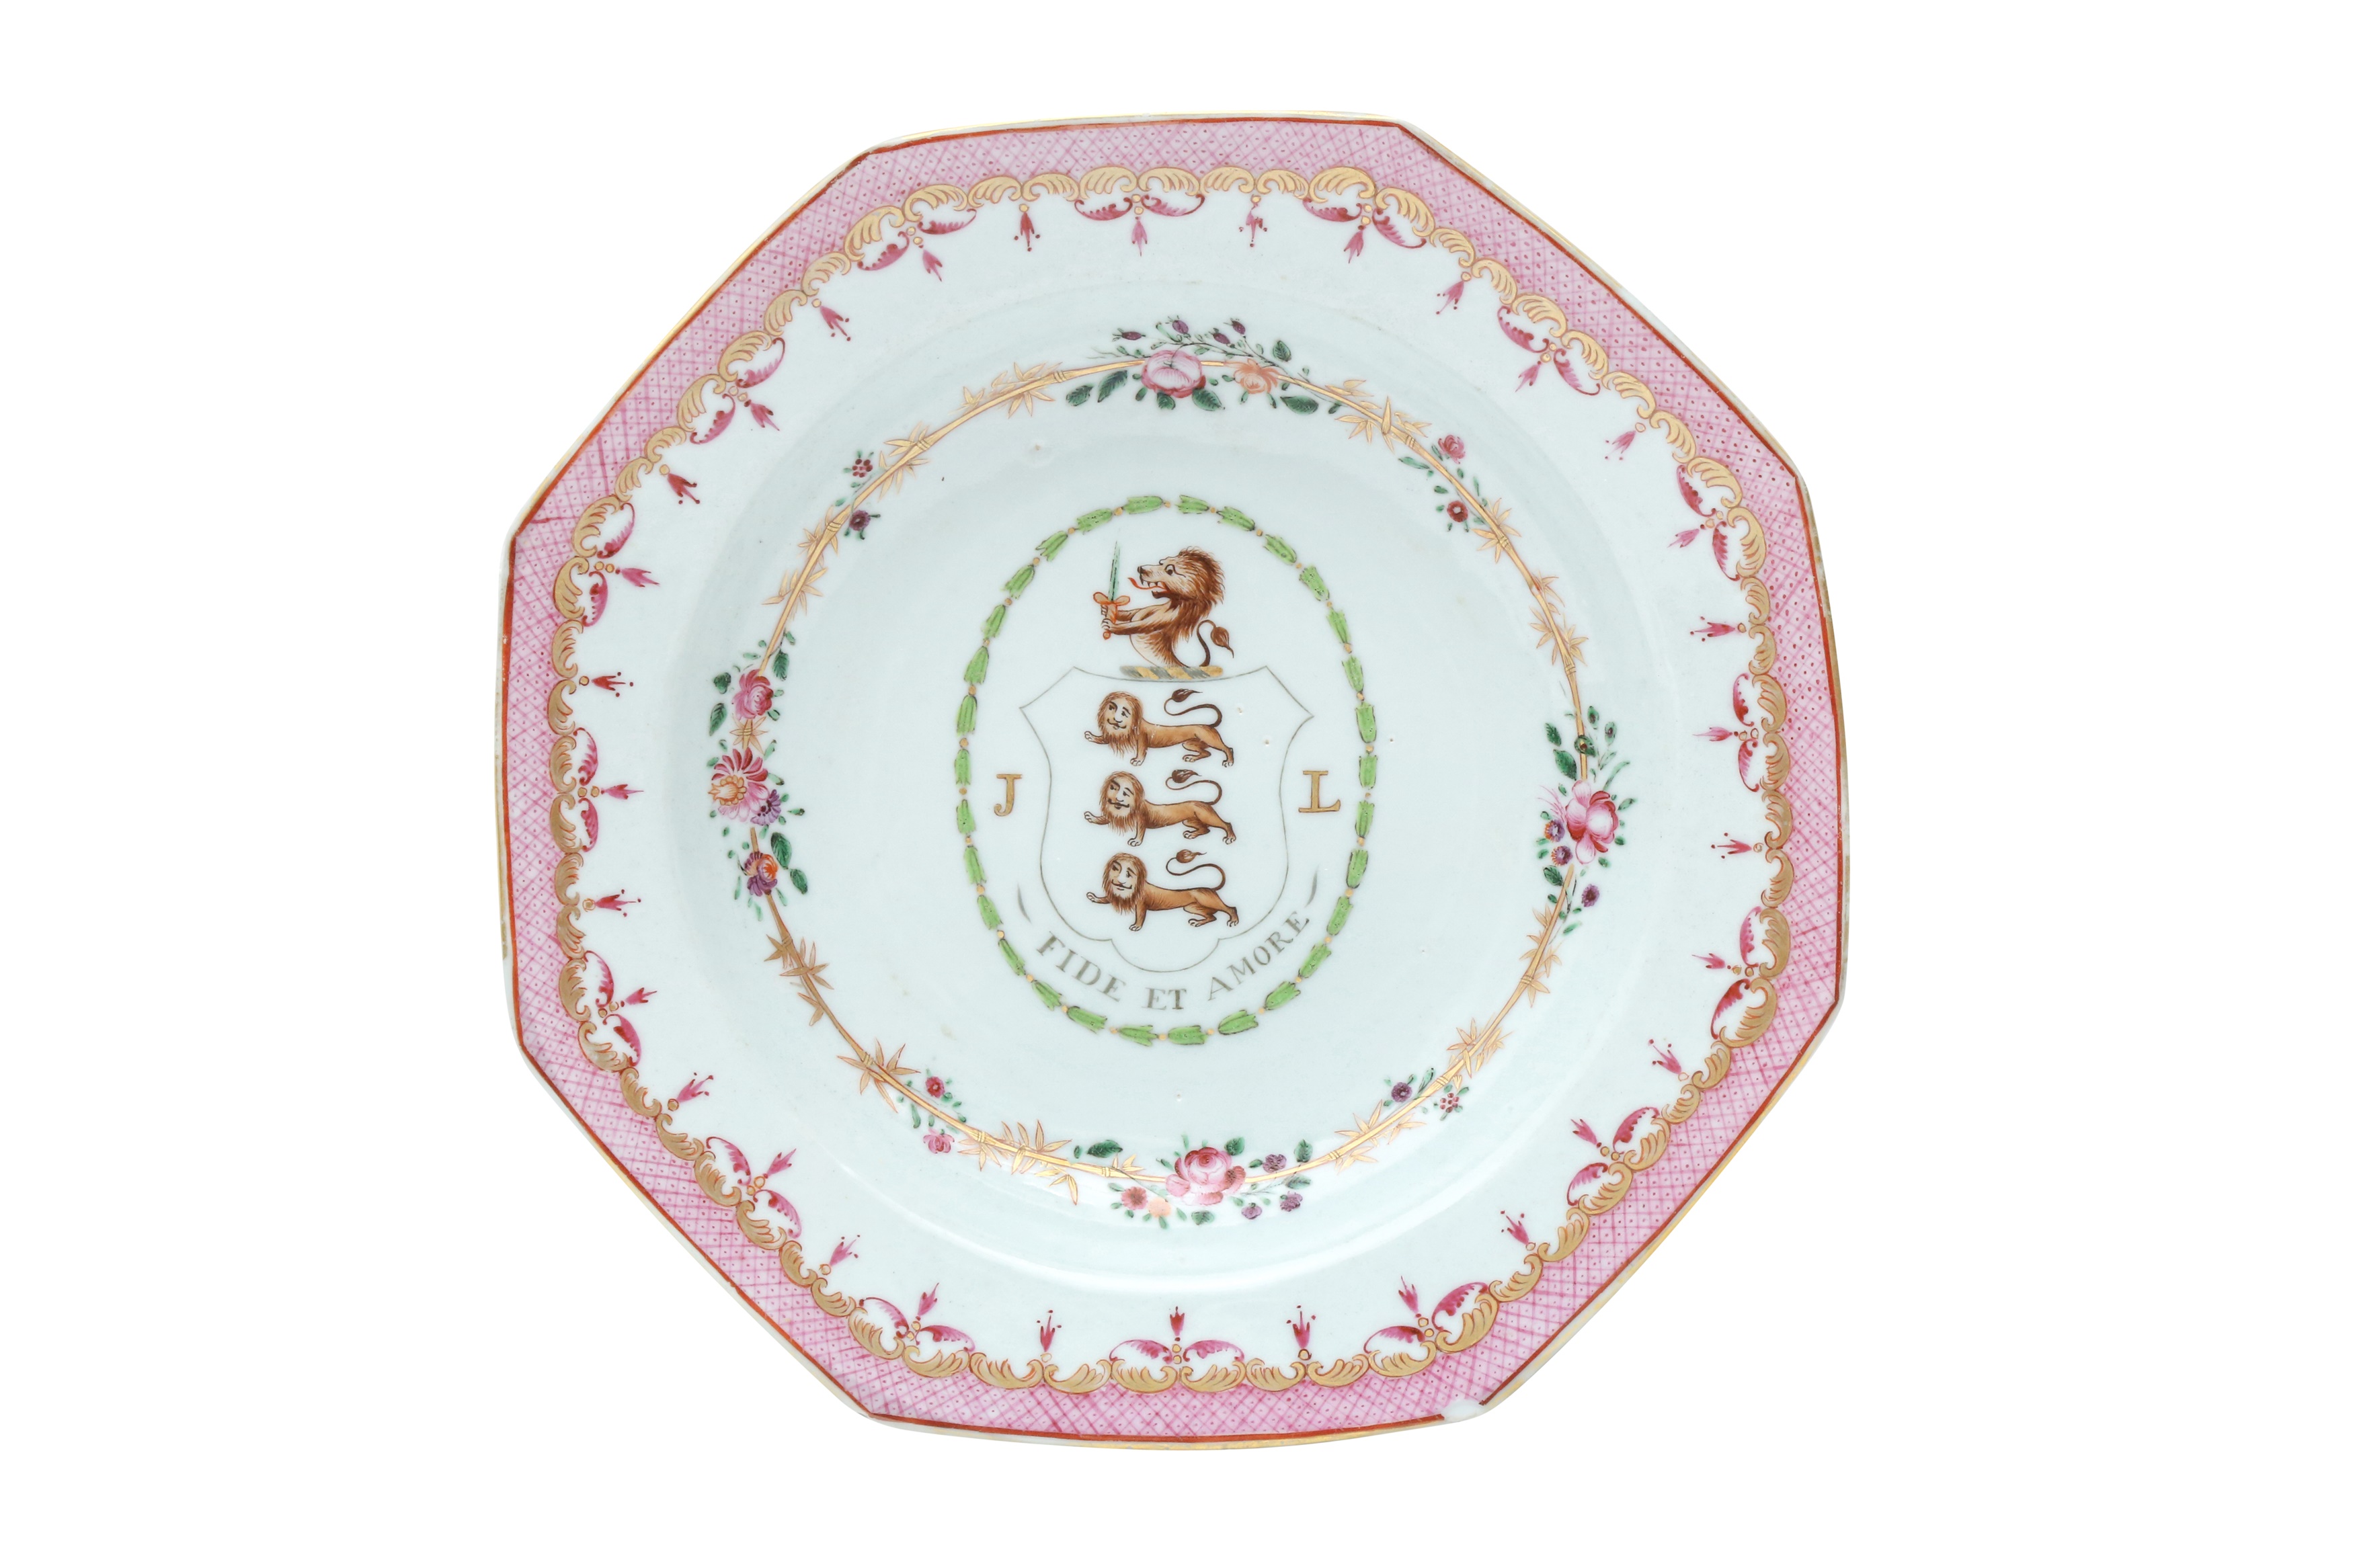 A PAIR OF CHINESE EXPORT FAMILLE ROSE ARMORIAL 'LUDLOW OF SHROPSHIRE' OCTAGONAL PORCELAIN DISHES 清乾隆 - Image 3 of 3